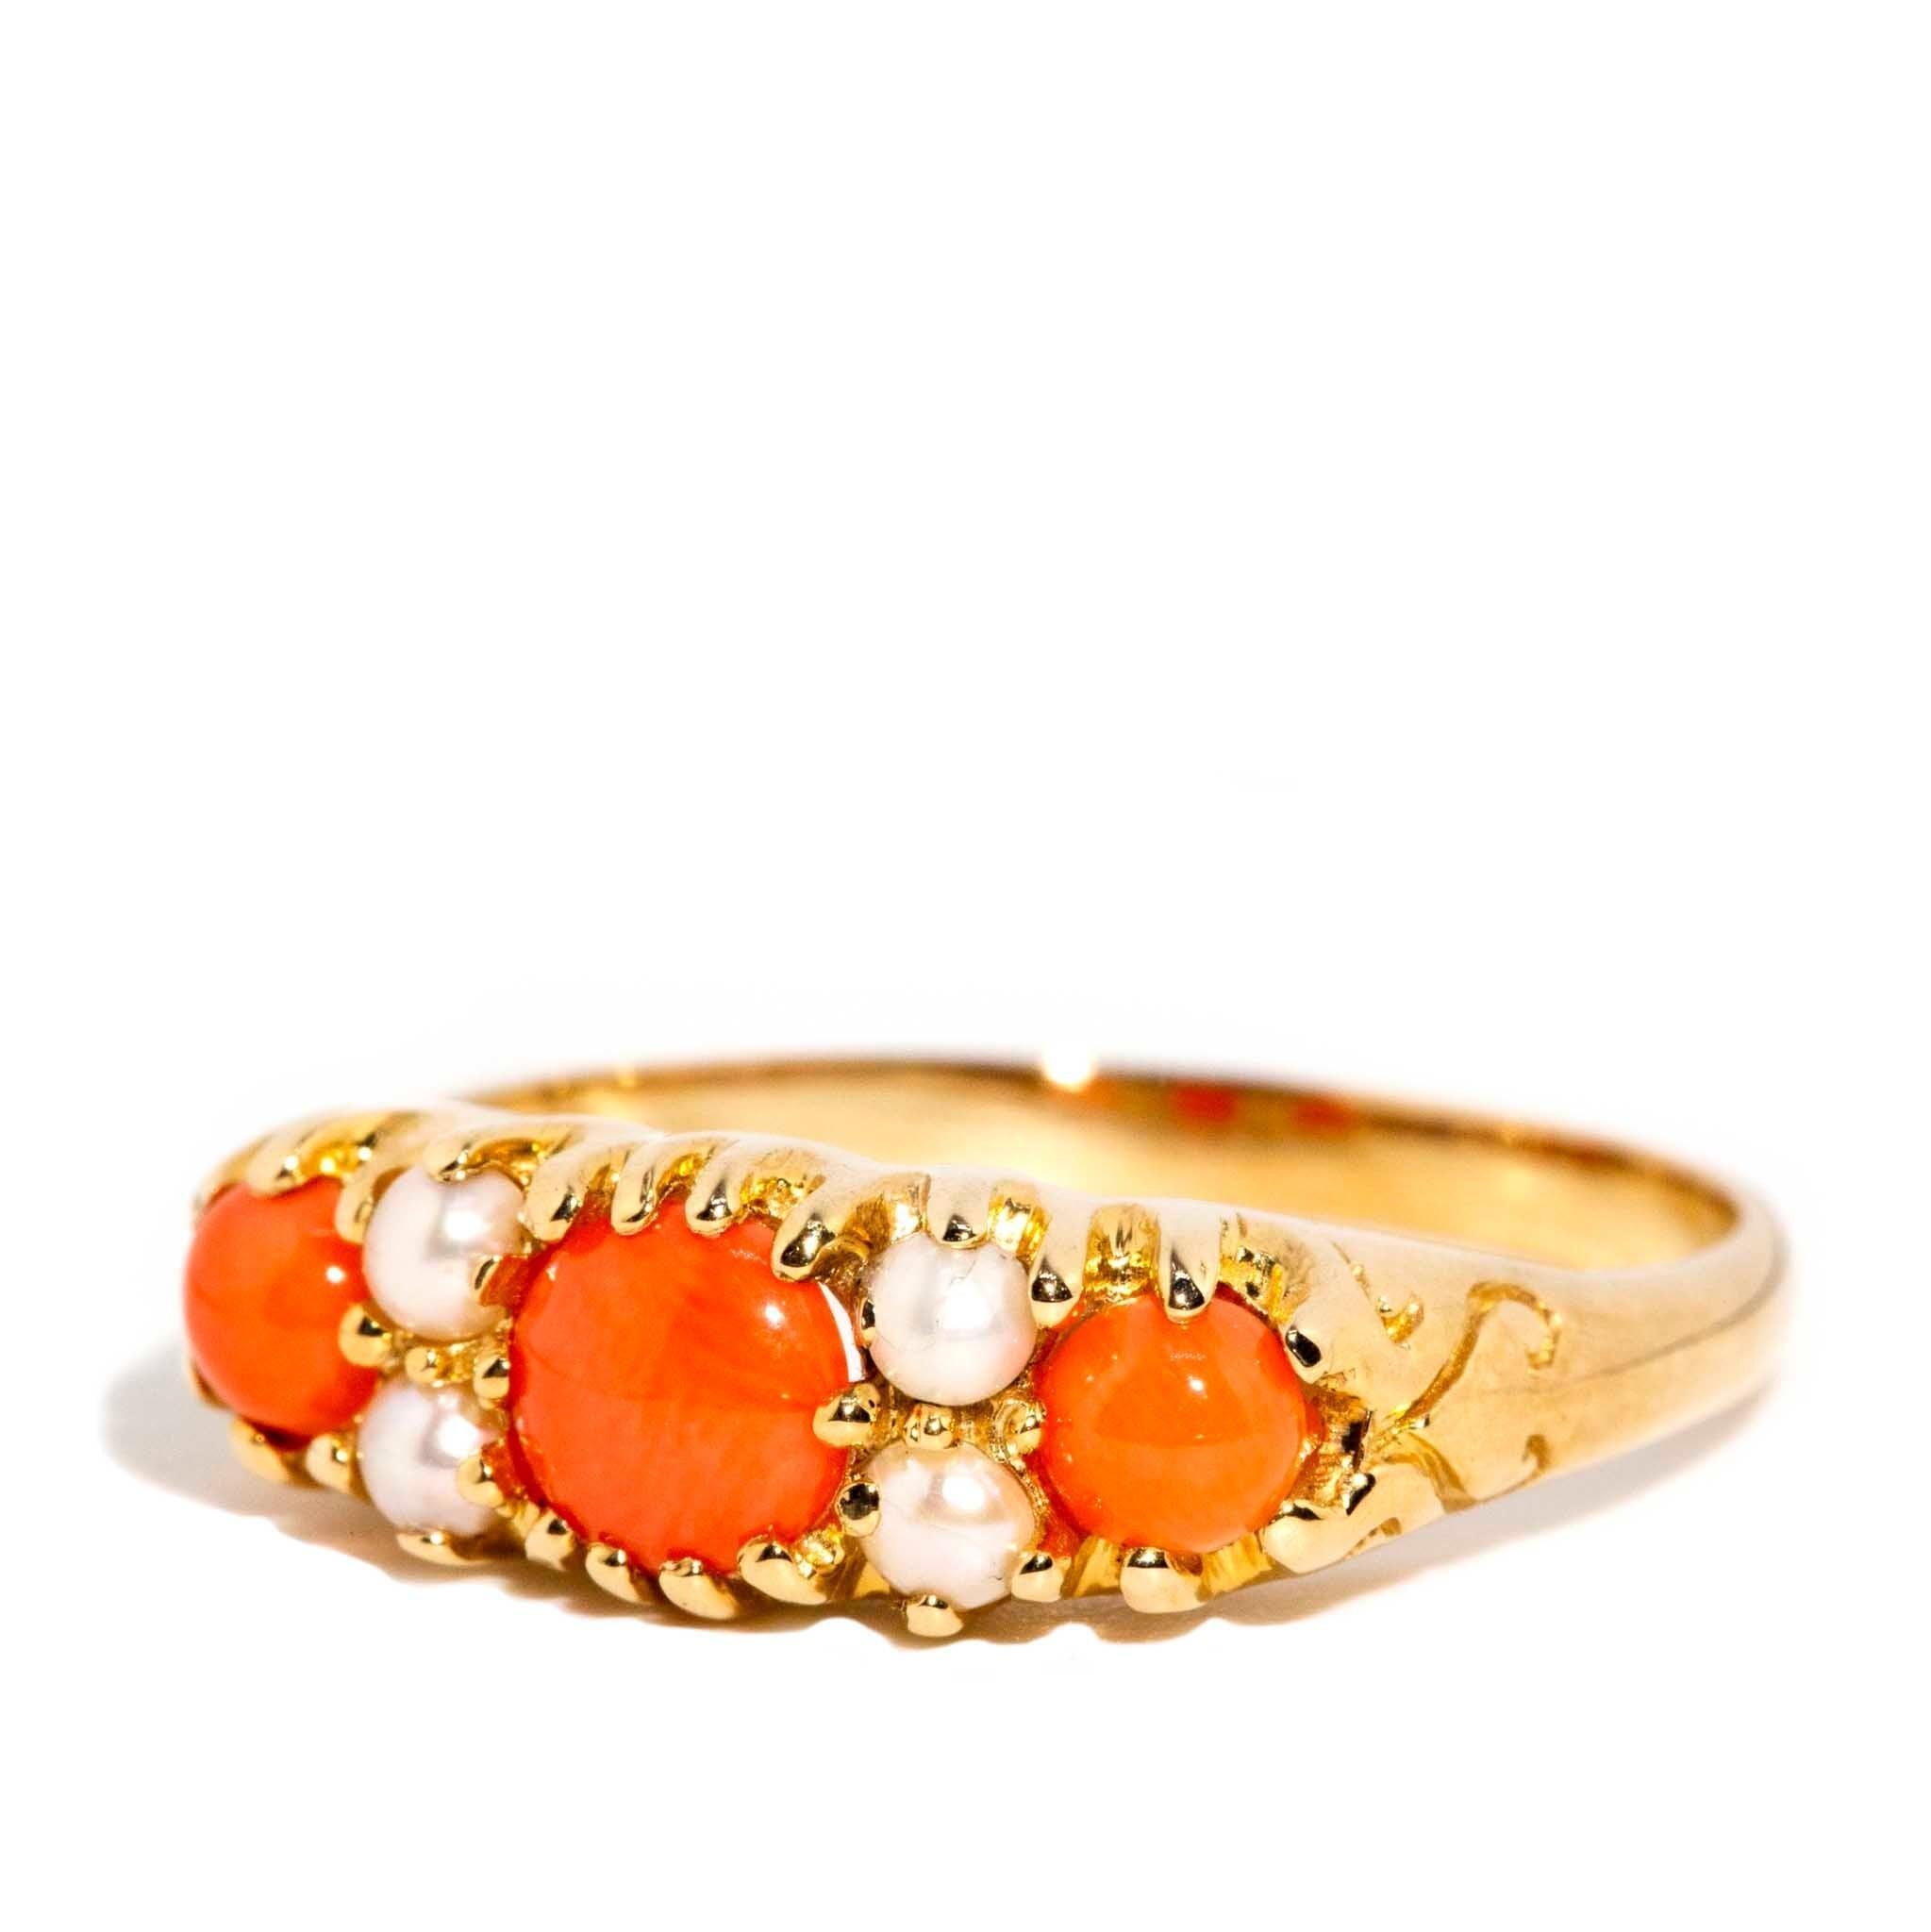 The 9 carat gold Ginger Ring beautifully captures the spirit and joy of an era when musicals danced and sang their way into cinemas. Crafted in gold, her rich red-orange coral and white seed pearls are a celebration of movement and light. She allows